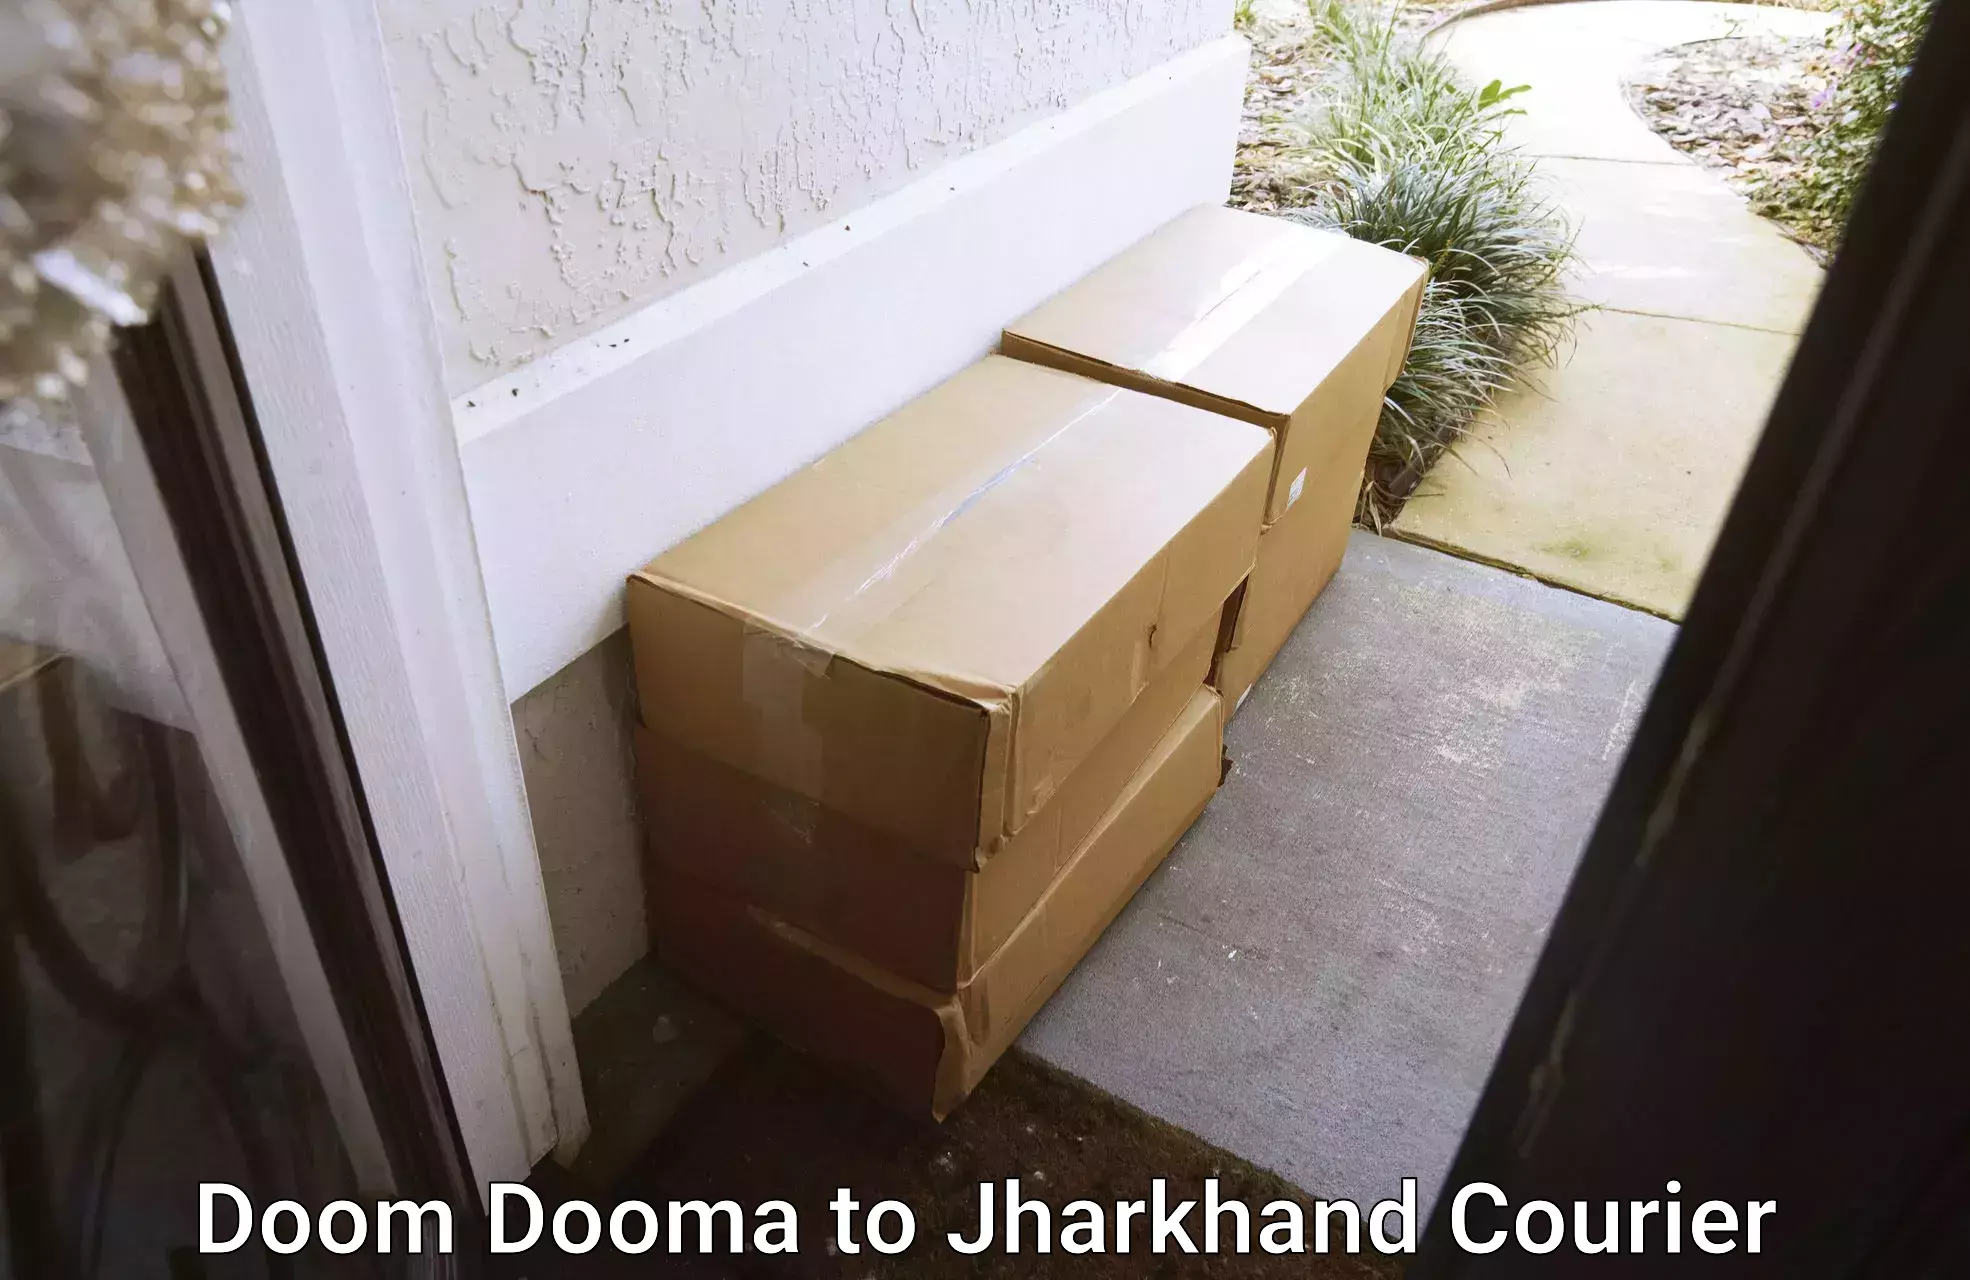 Reliable parcel services Doom Dooma to Jamshedpur